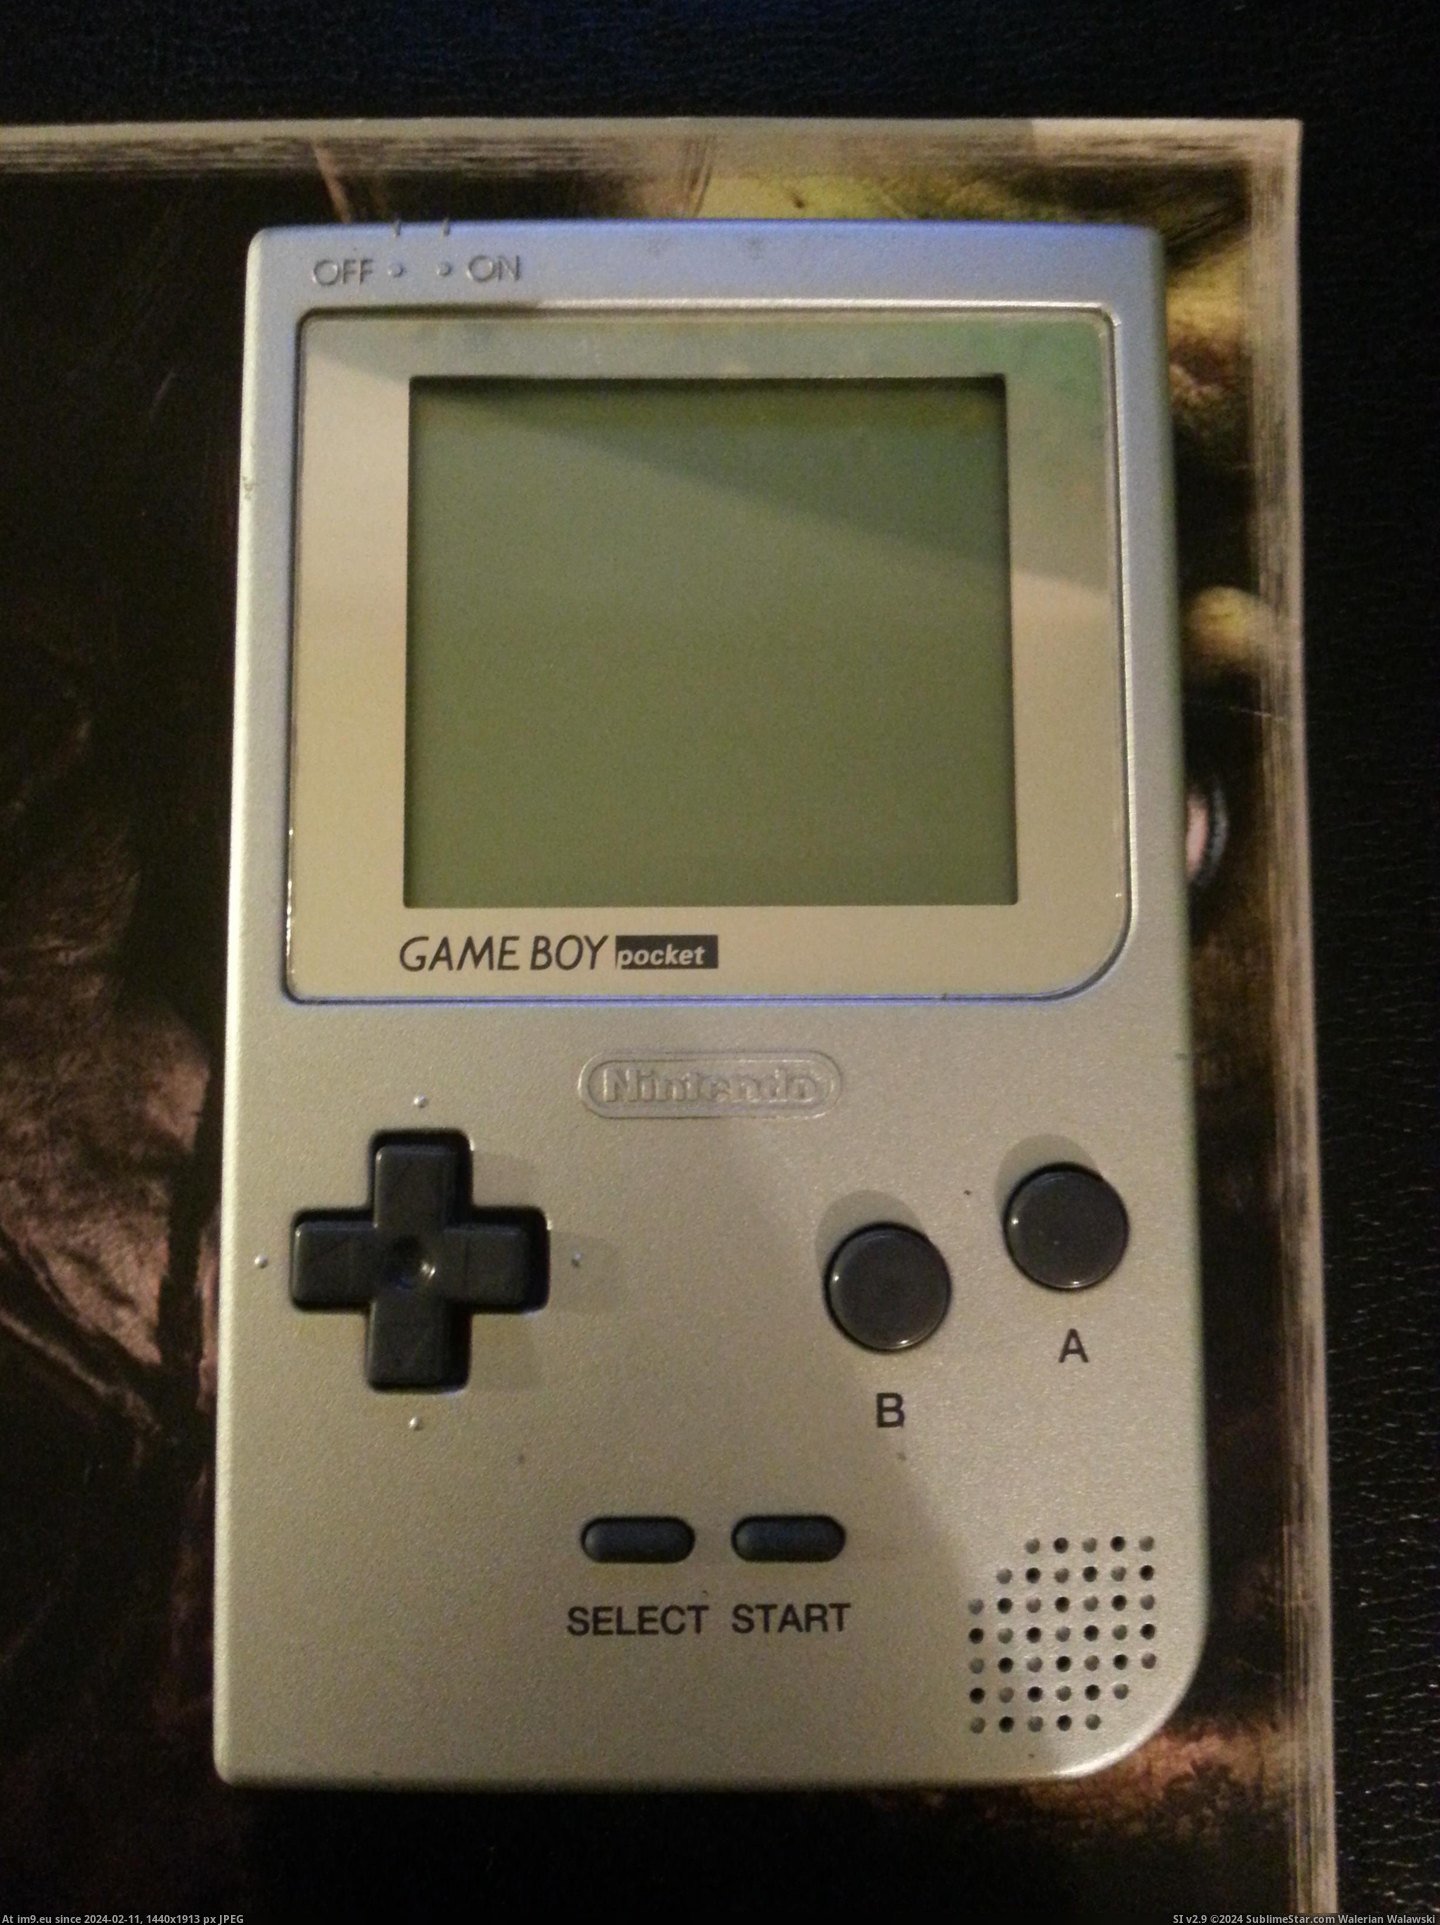 #Pocket  #Gameboy gameboy pocket Pic. (Image of album things to show))